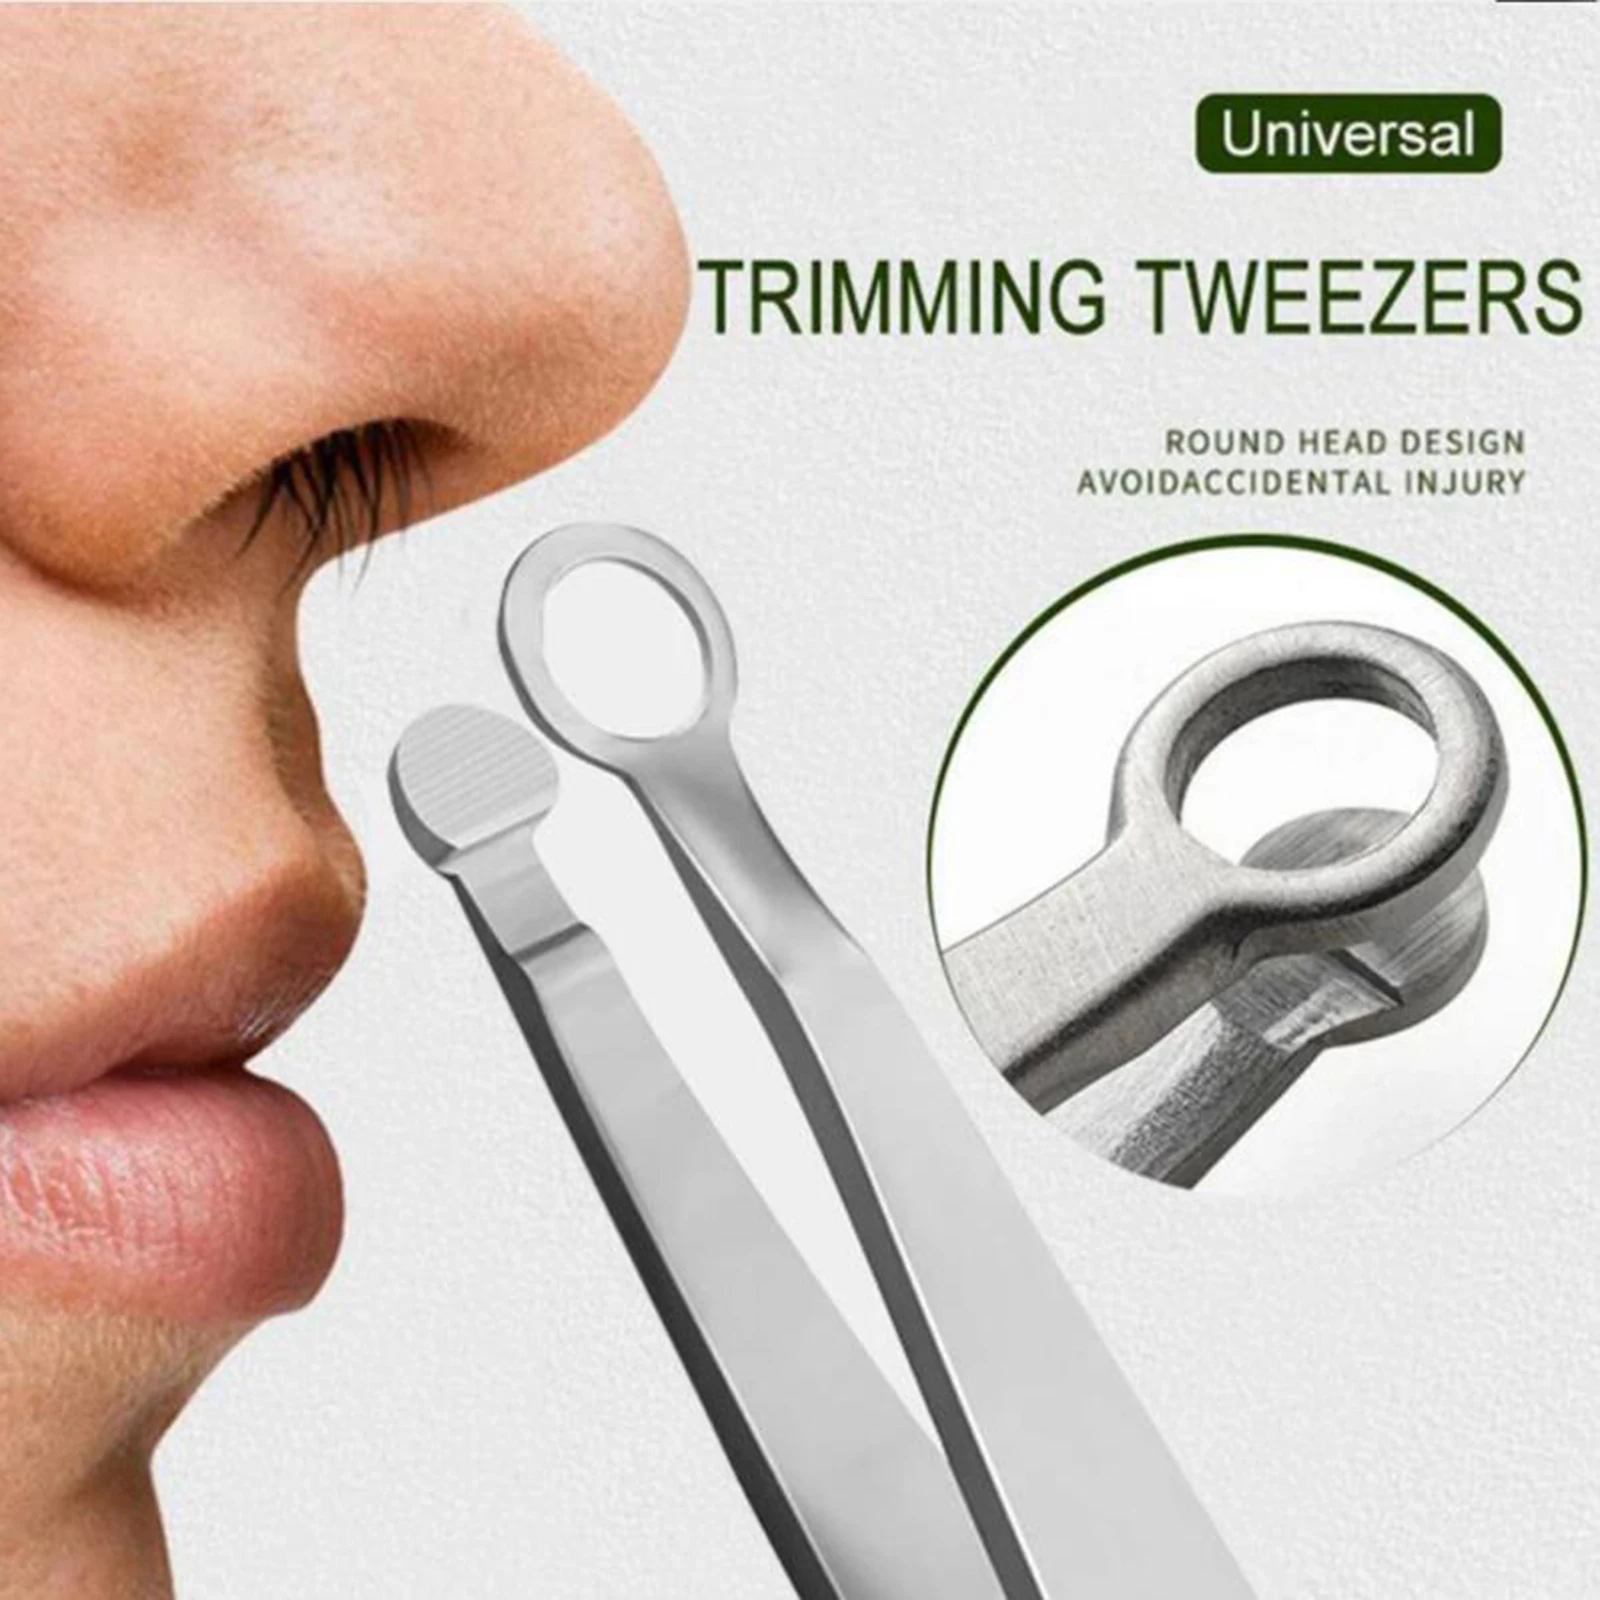 1pcs Universal Nose Hair Trimming Tweezers Safe Stainless Steel Trimmer Eyebrow Grooming Tools for Nose Hair Shaving Supplies